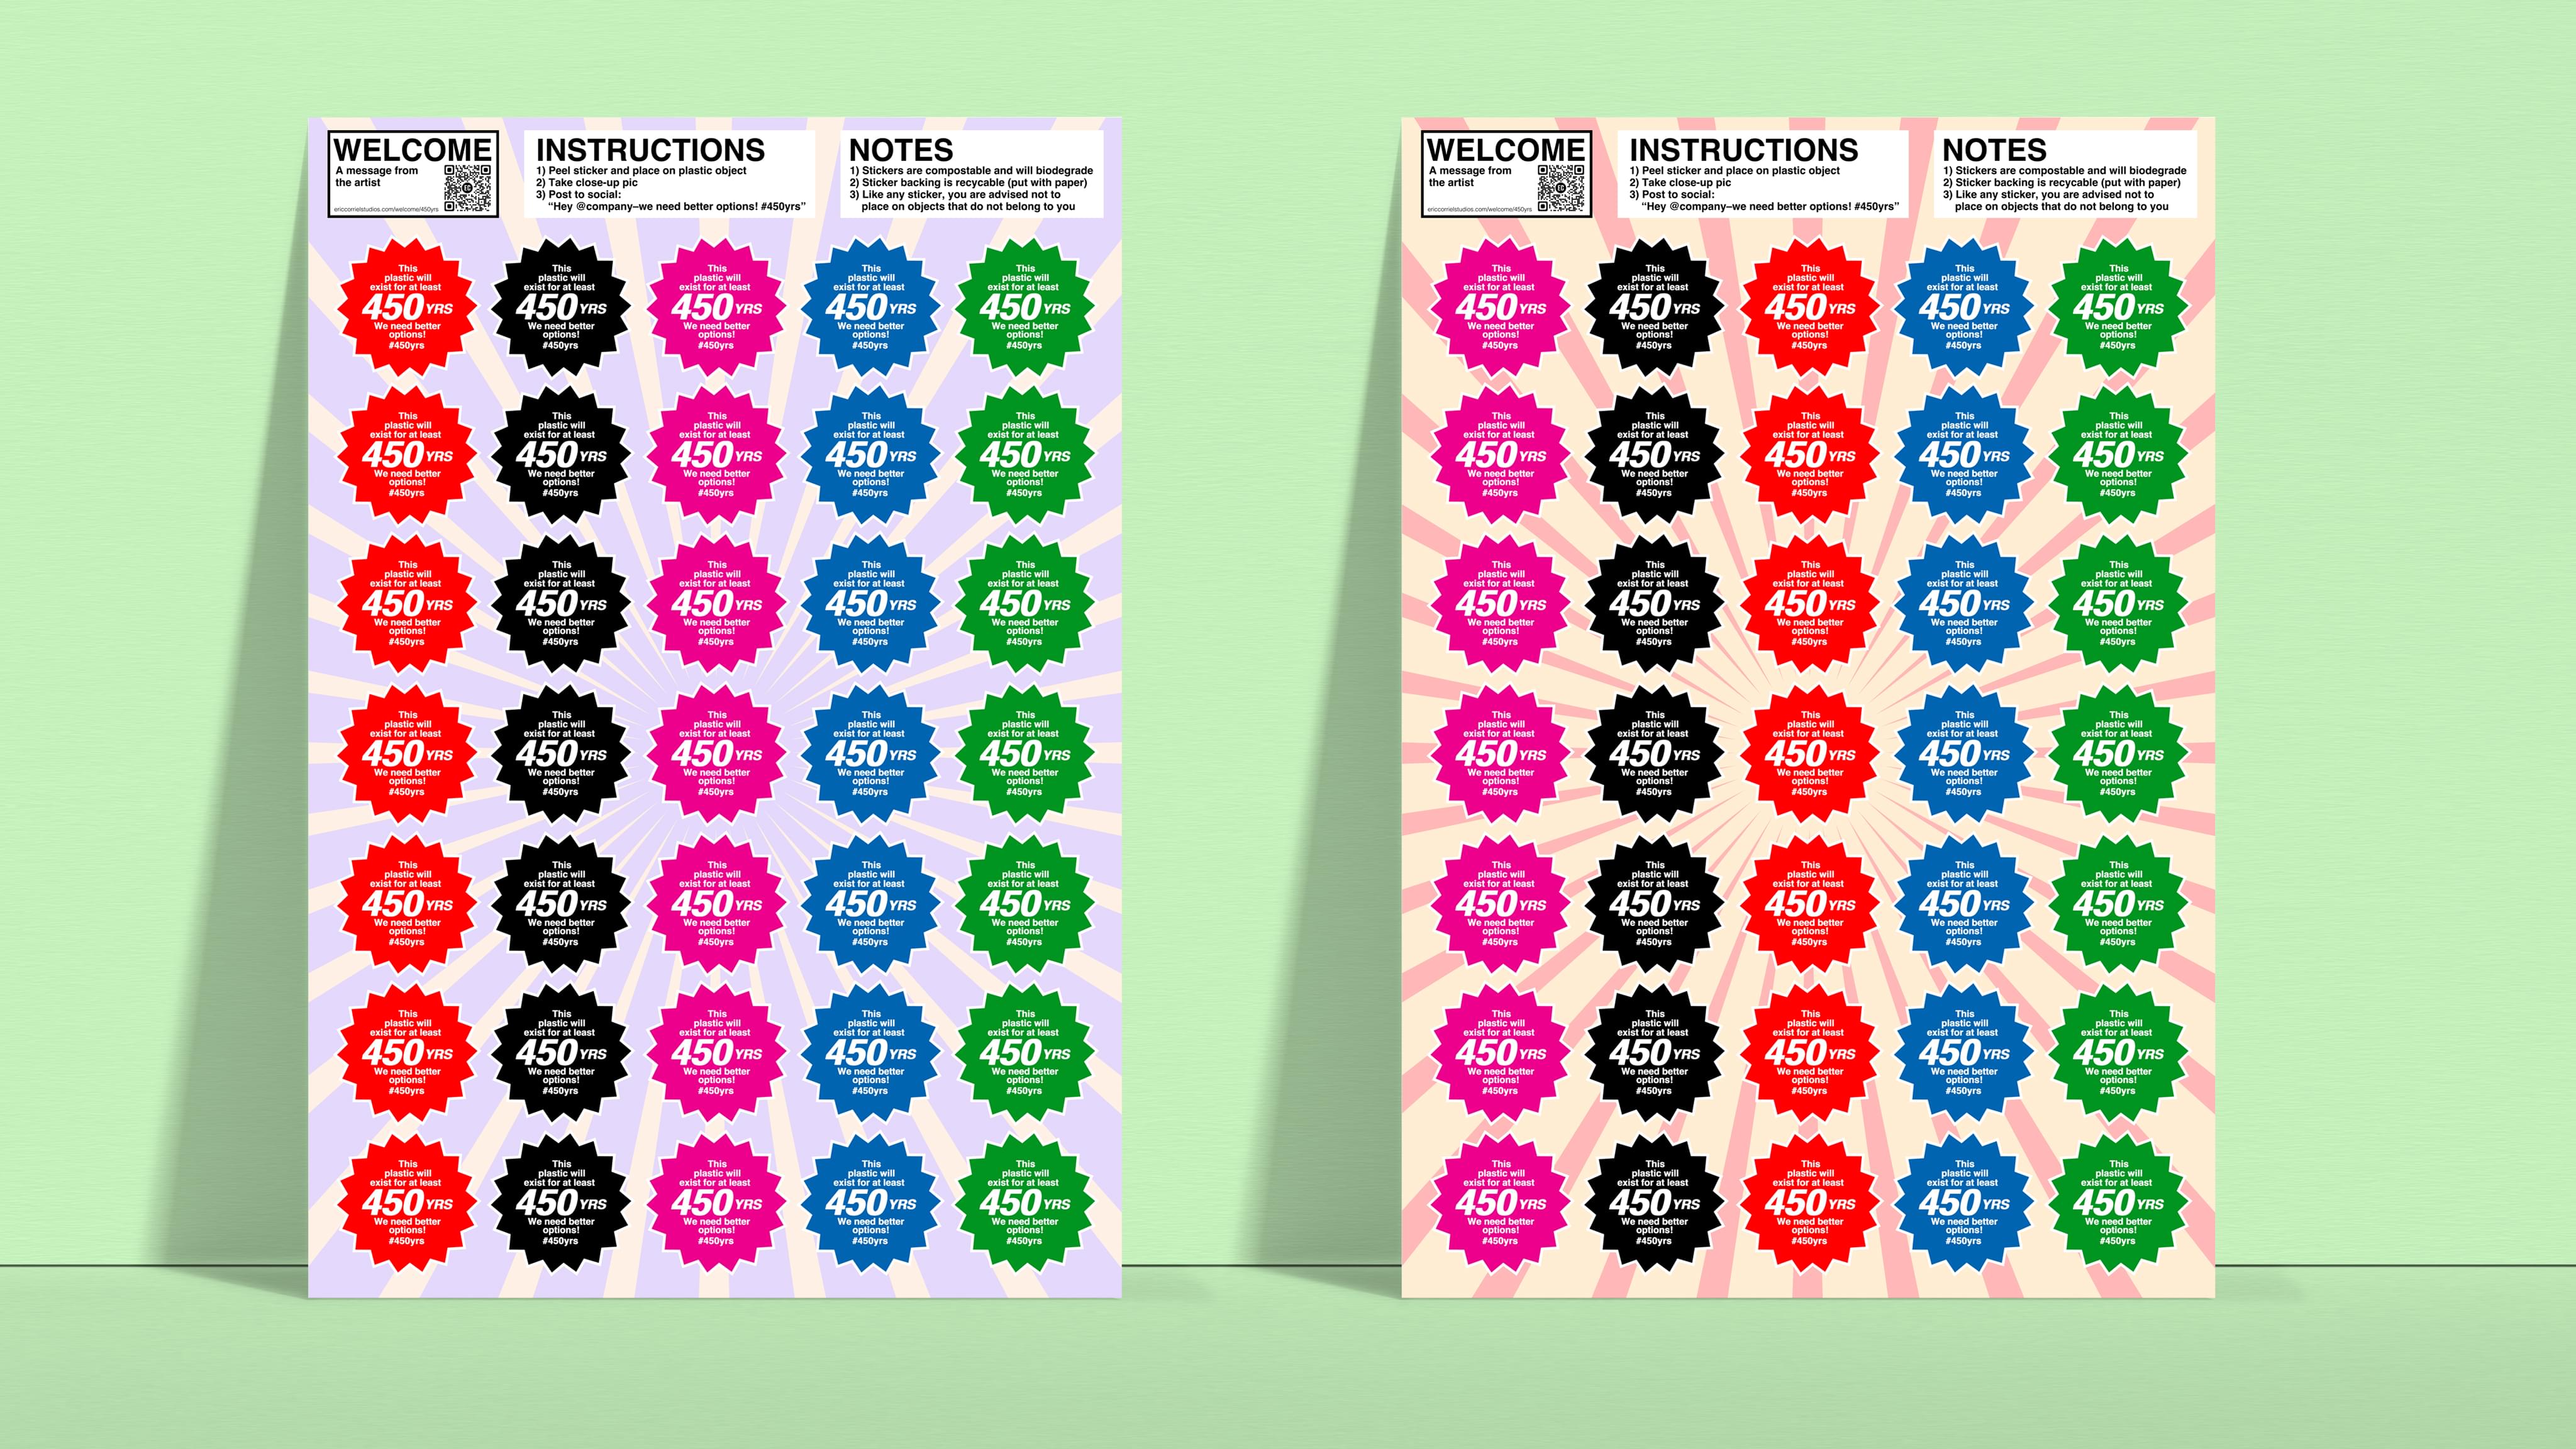 Photograph showing two 8.5 inch by 12.25 inch sticker sheets side by side with different color backgrounds. Each sheet contains 35 starburst shaped stickers that say, 'This plastic will exist for at least 450 YRS. We need better options! #450yrs'